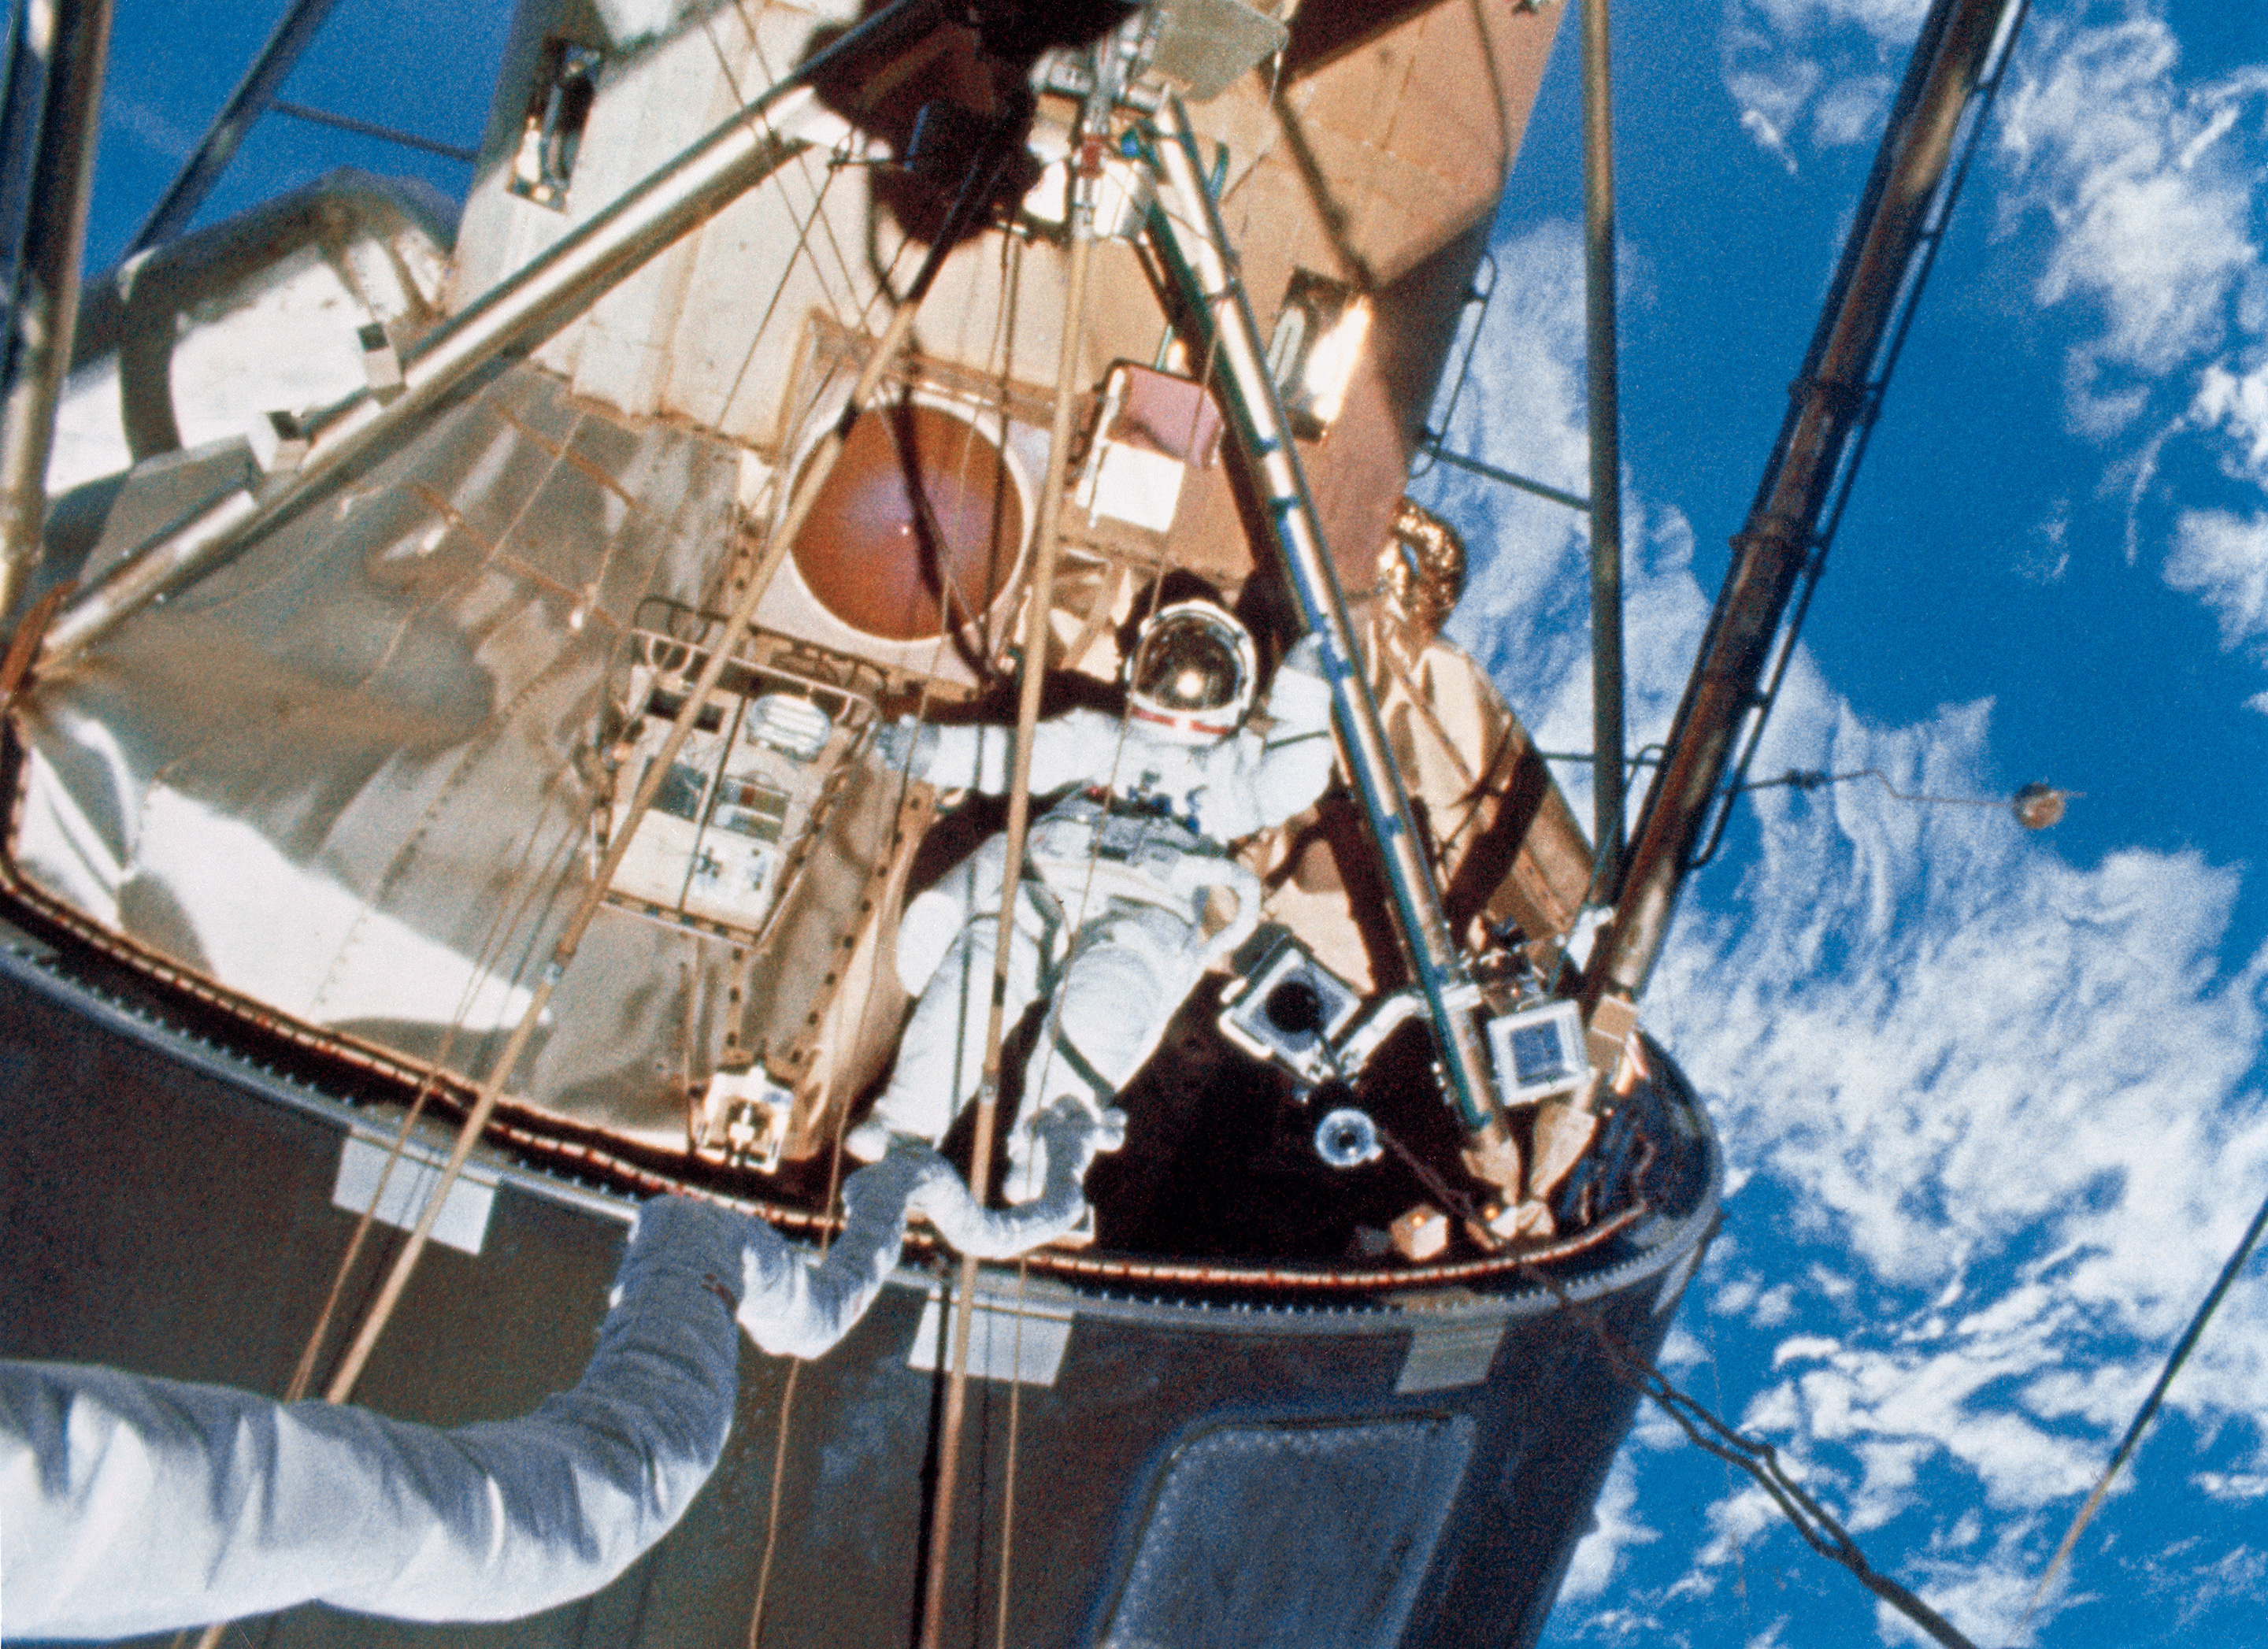 Scientist-astronaut Ed Gibson has just egressed the Skylab EVA hatchway during the final Skylab Extravehicular Activity EVA which took place on February 3, 1974. Photo: NASA